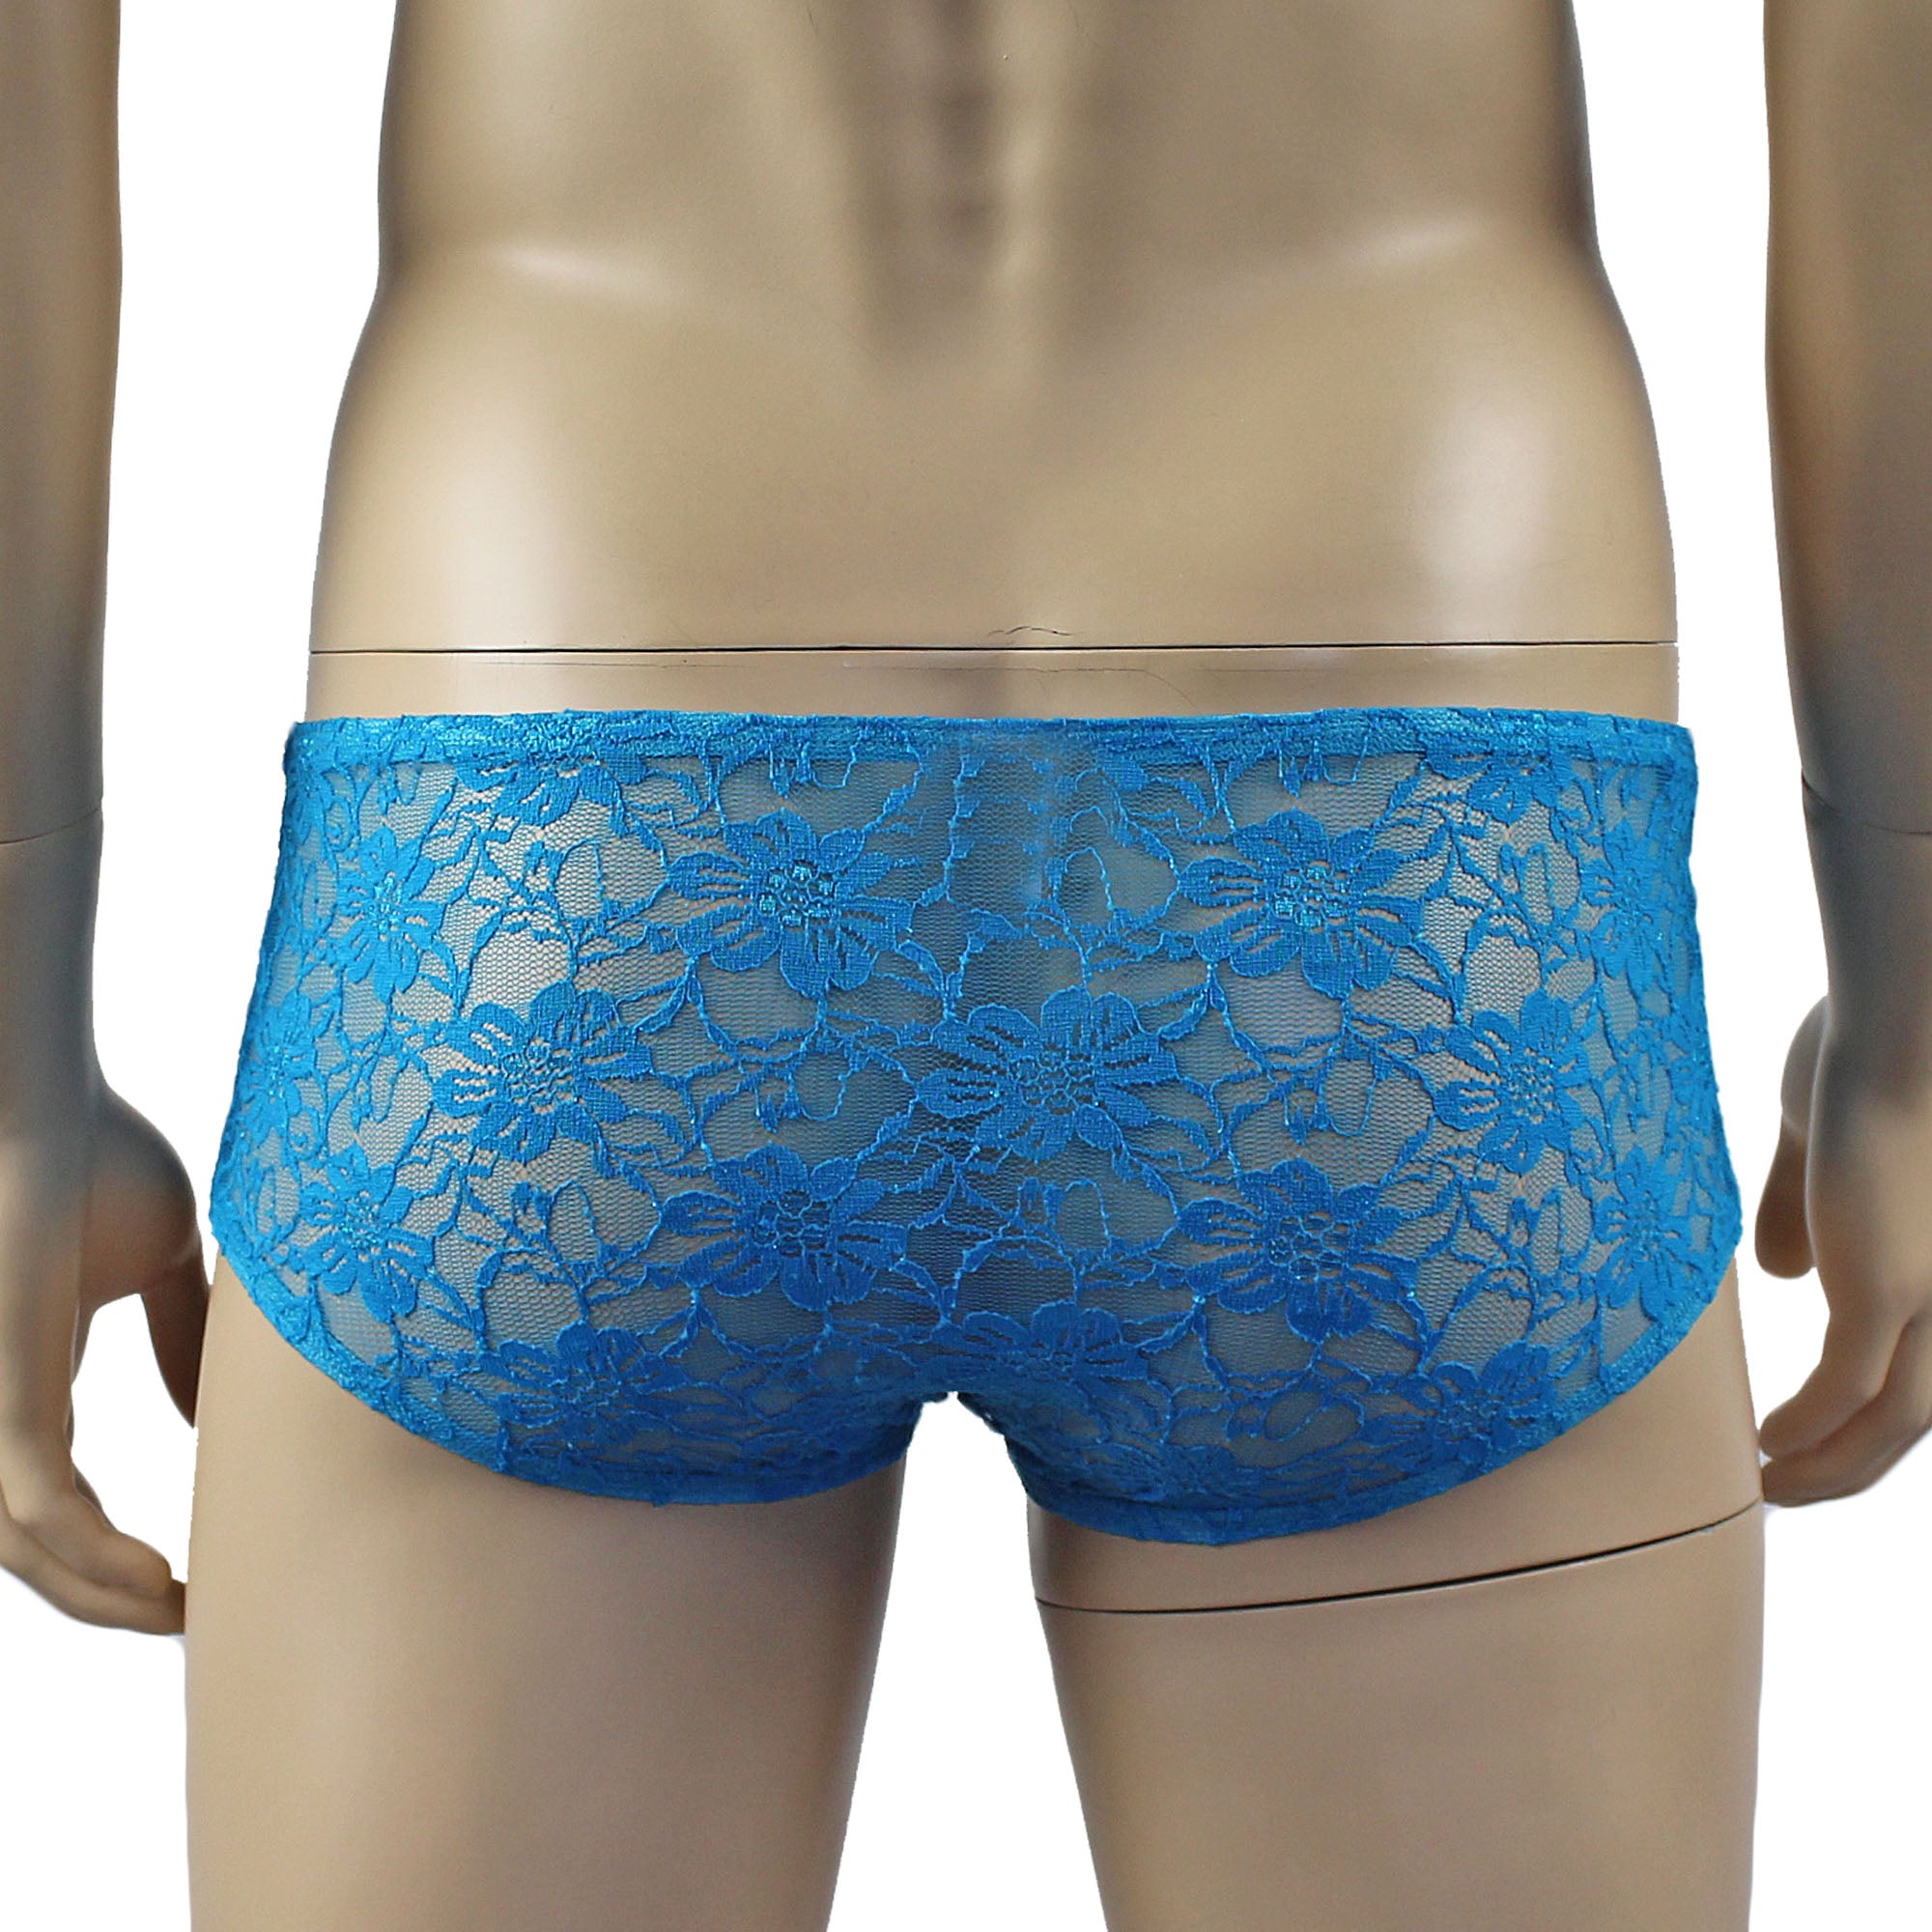 Mens Sexy Lingerie Stretch Lace  Male Panty Bikini Brief Turquoise